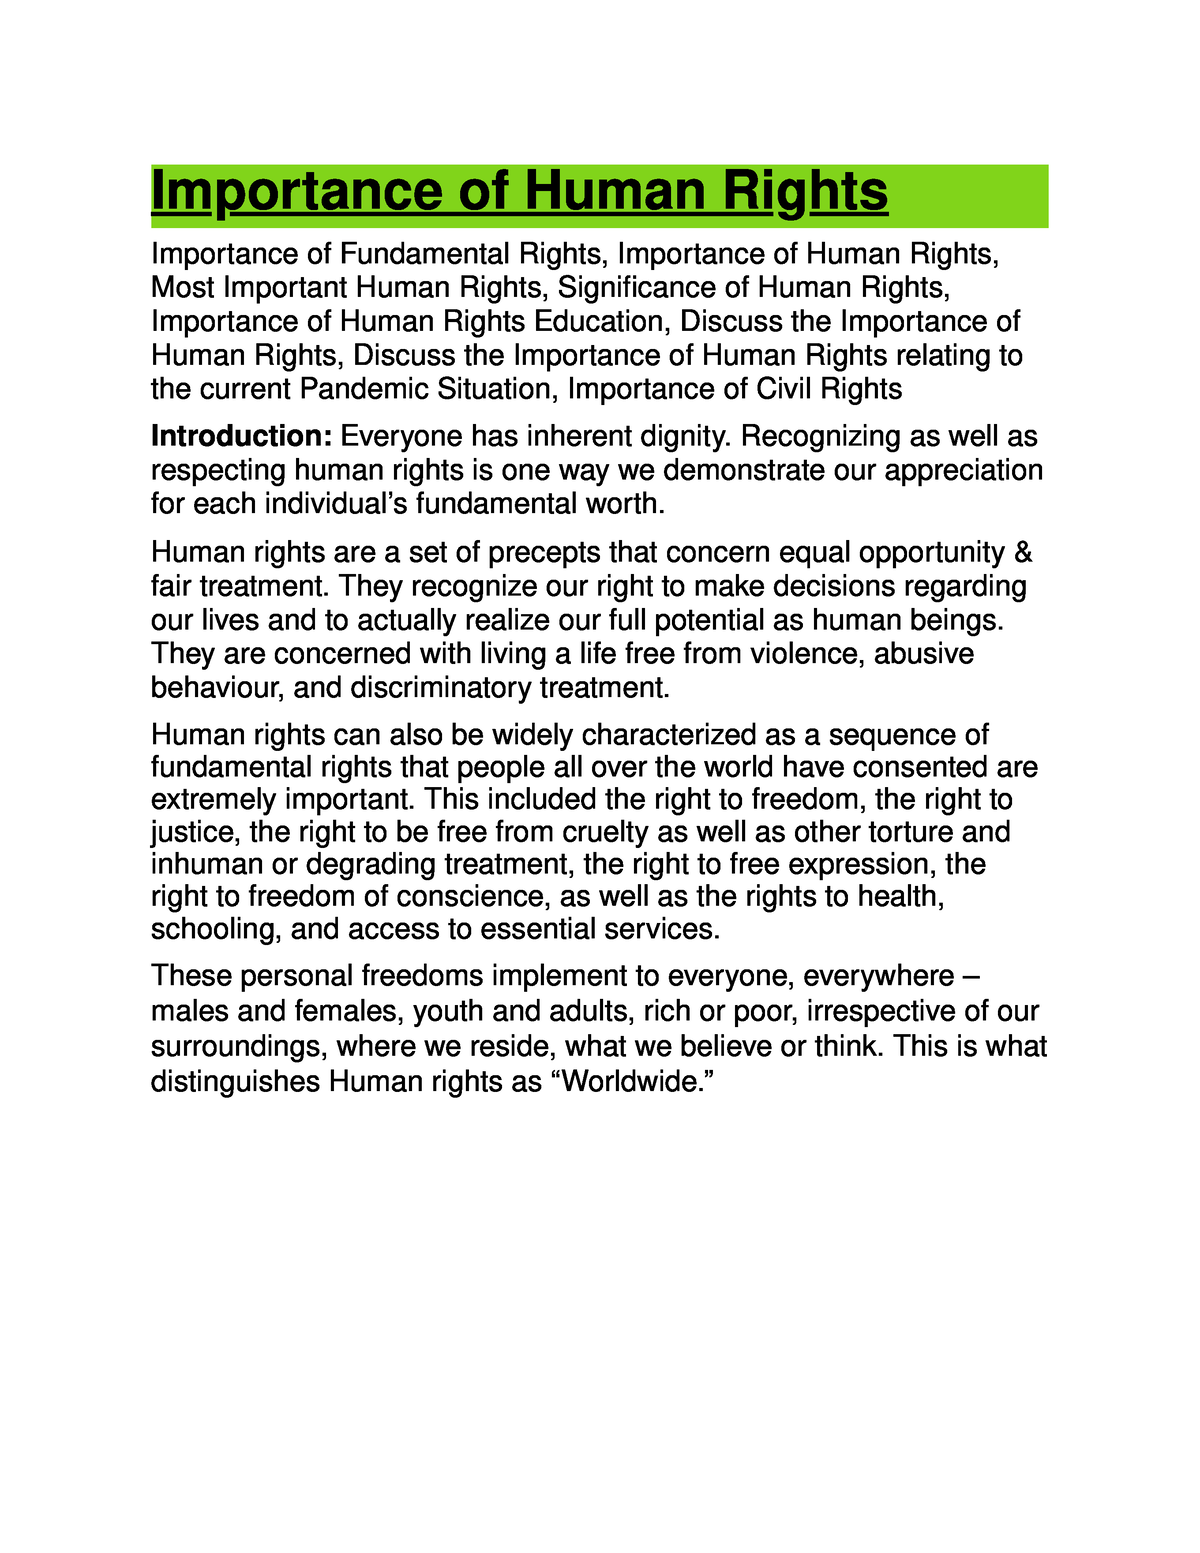 essay on importance of human rights